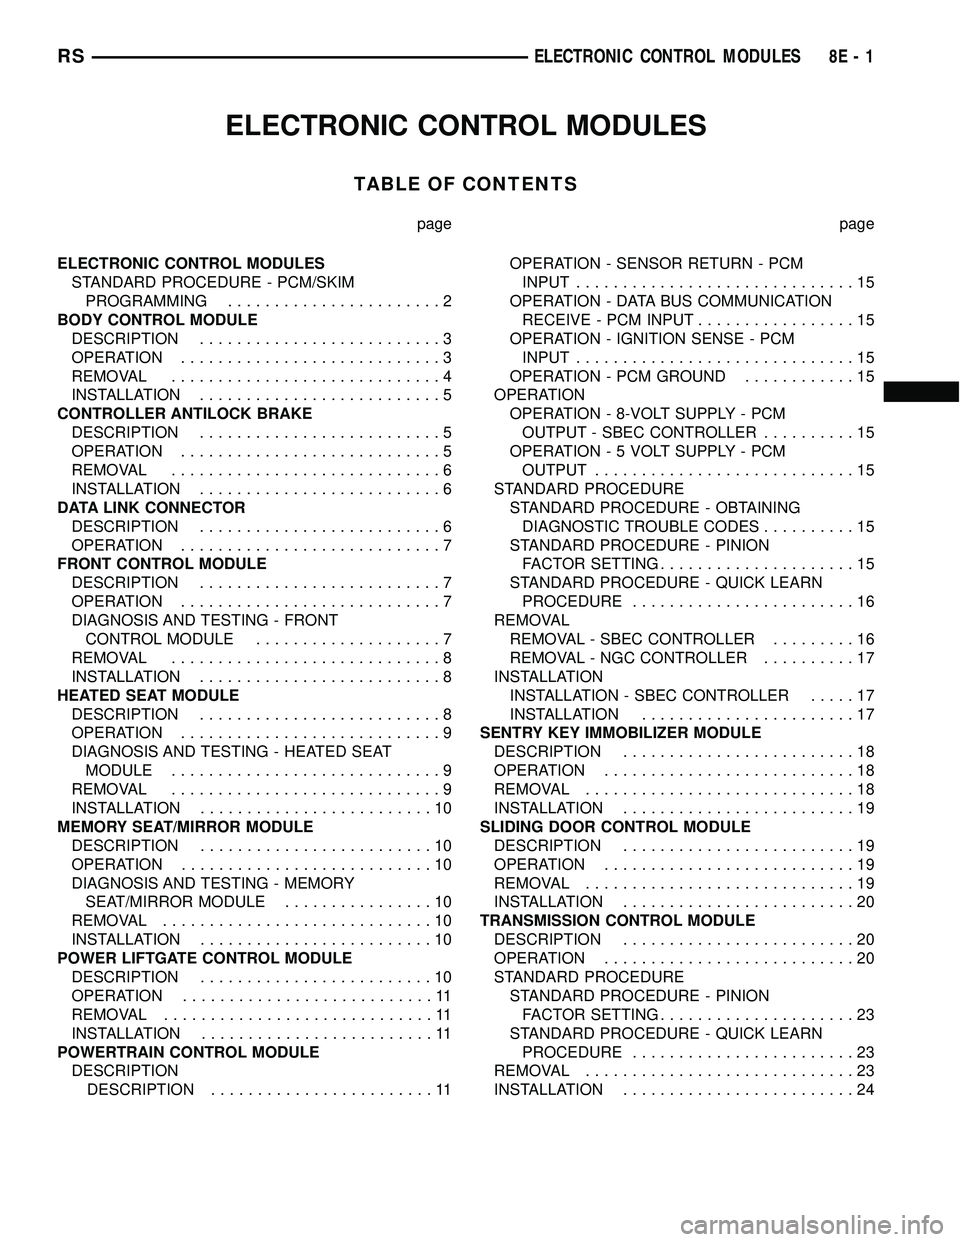 CHRYSLER VOYAGER 2004  Service Manual ELECTRONIC CONTROL MODULES
TABLE OF CONTENTS
page page
ELECTRONIC CONTROL MODULES
STANDARD PROCEDURE - PCM/SKIM
PROGRAMMING.......................2
BODY CONTROL MODULE
DESCRIPTION.....................